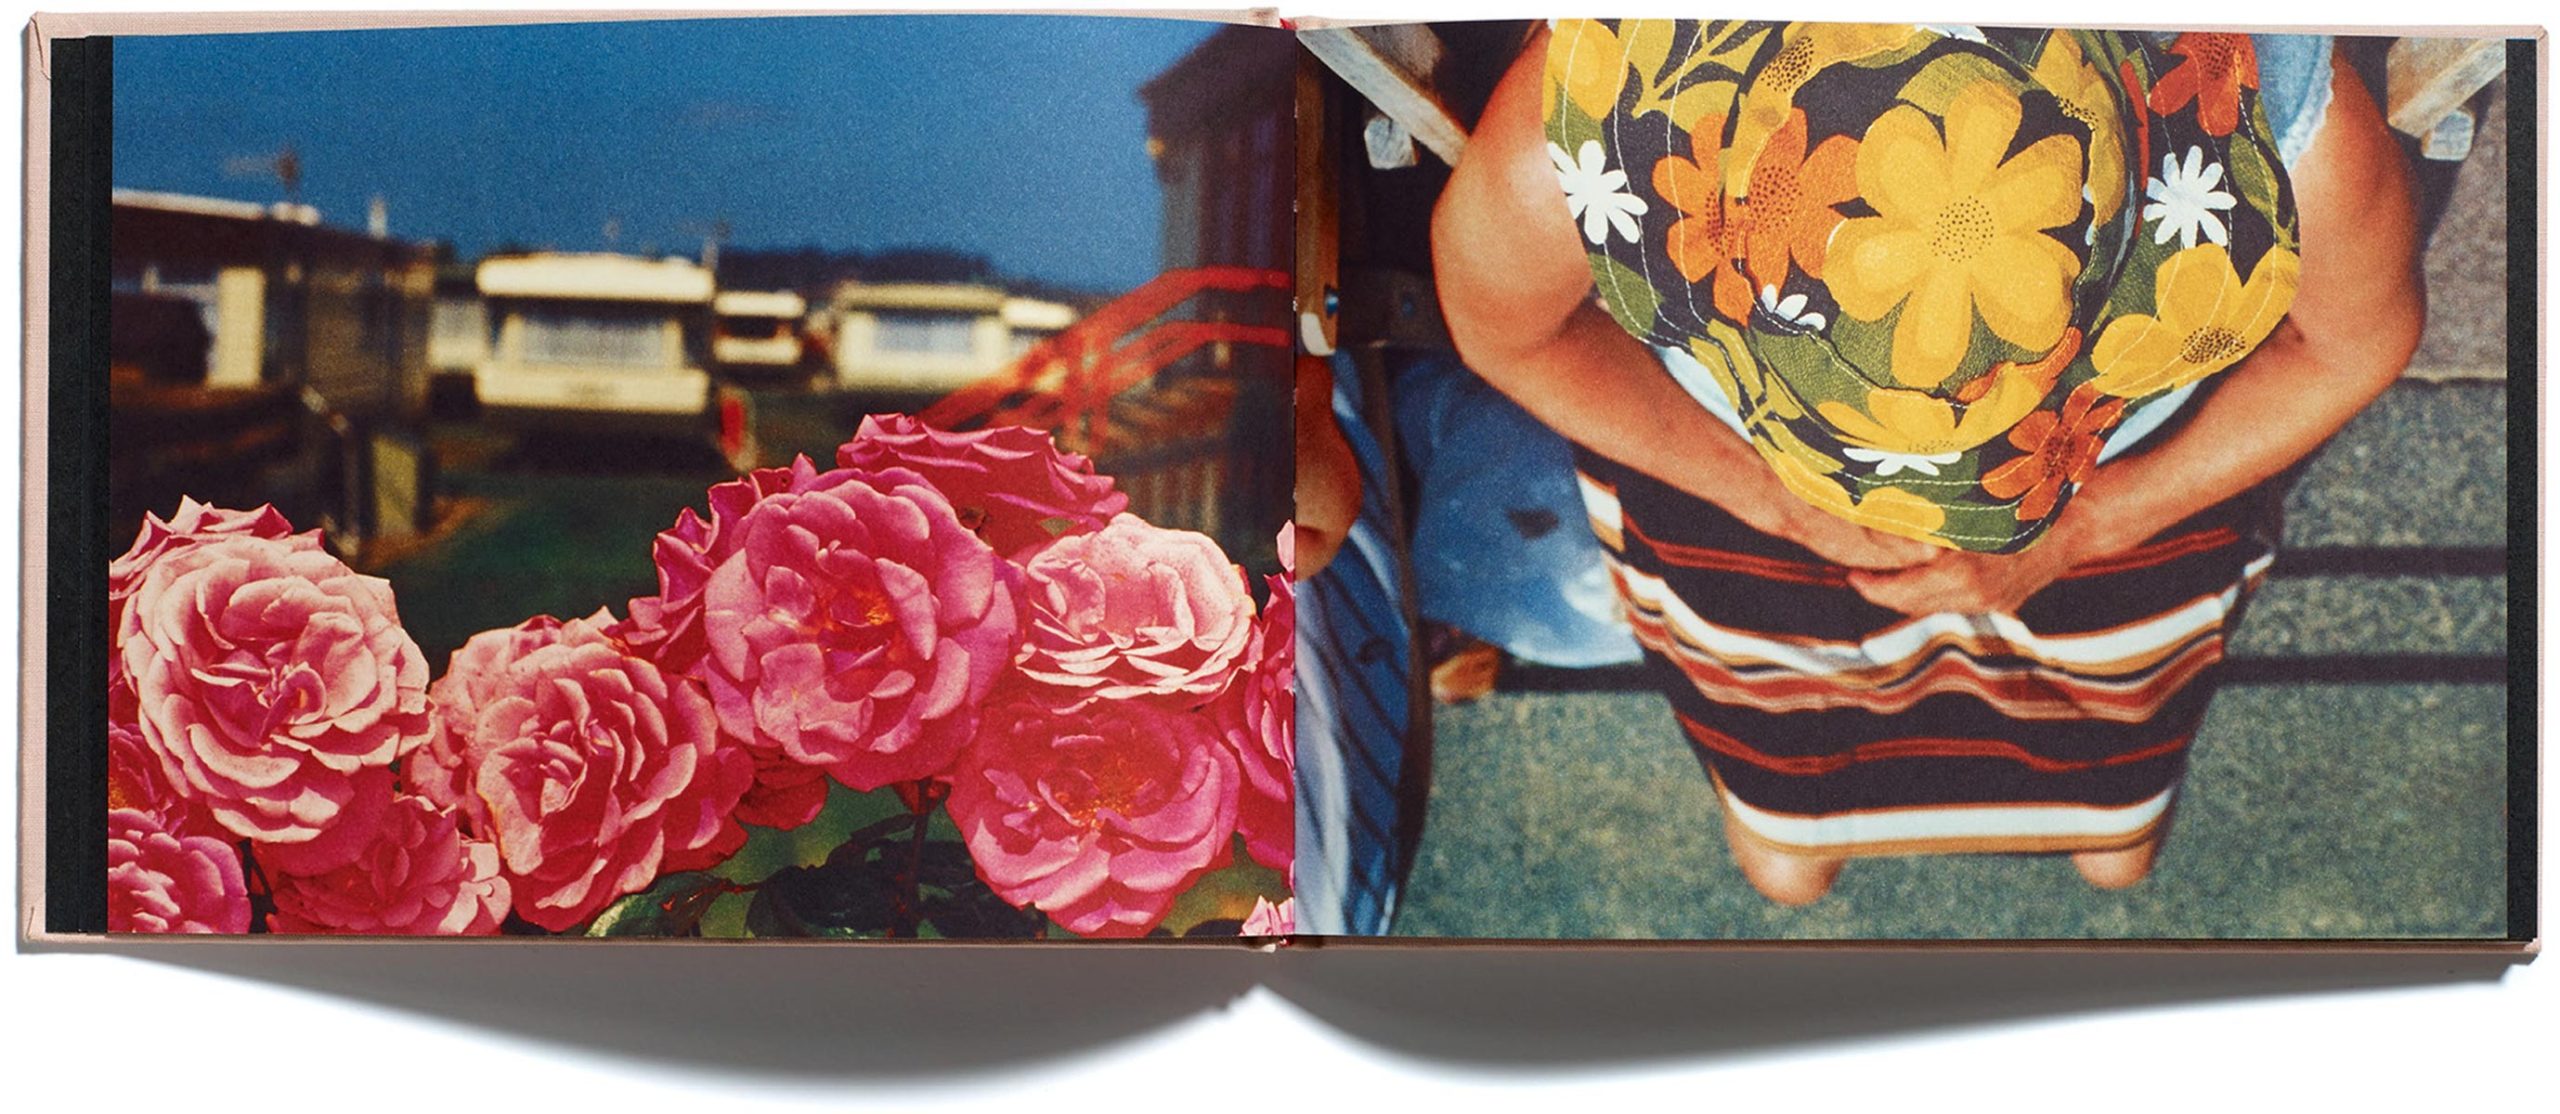 Browns Editions, Browns Editions Publishing, Browns Editions Books, Browns Editions Martin Parr, Browns Editions Flowers, Browns Editions Martin Parr Flowers